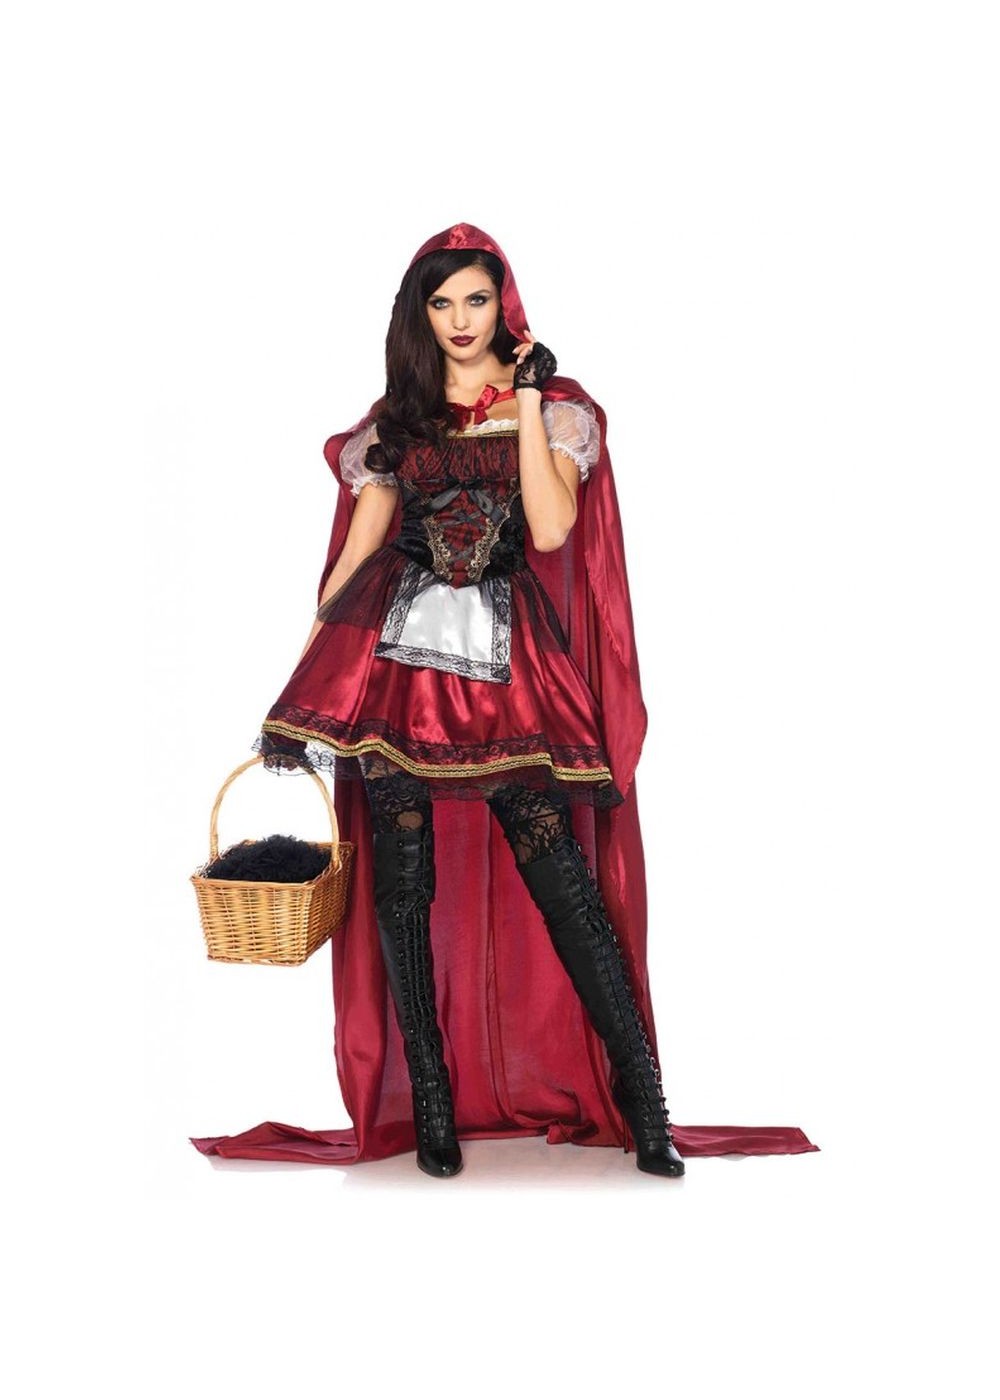 Captivating Miss Red Riding Hood Women Costume